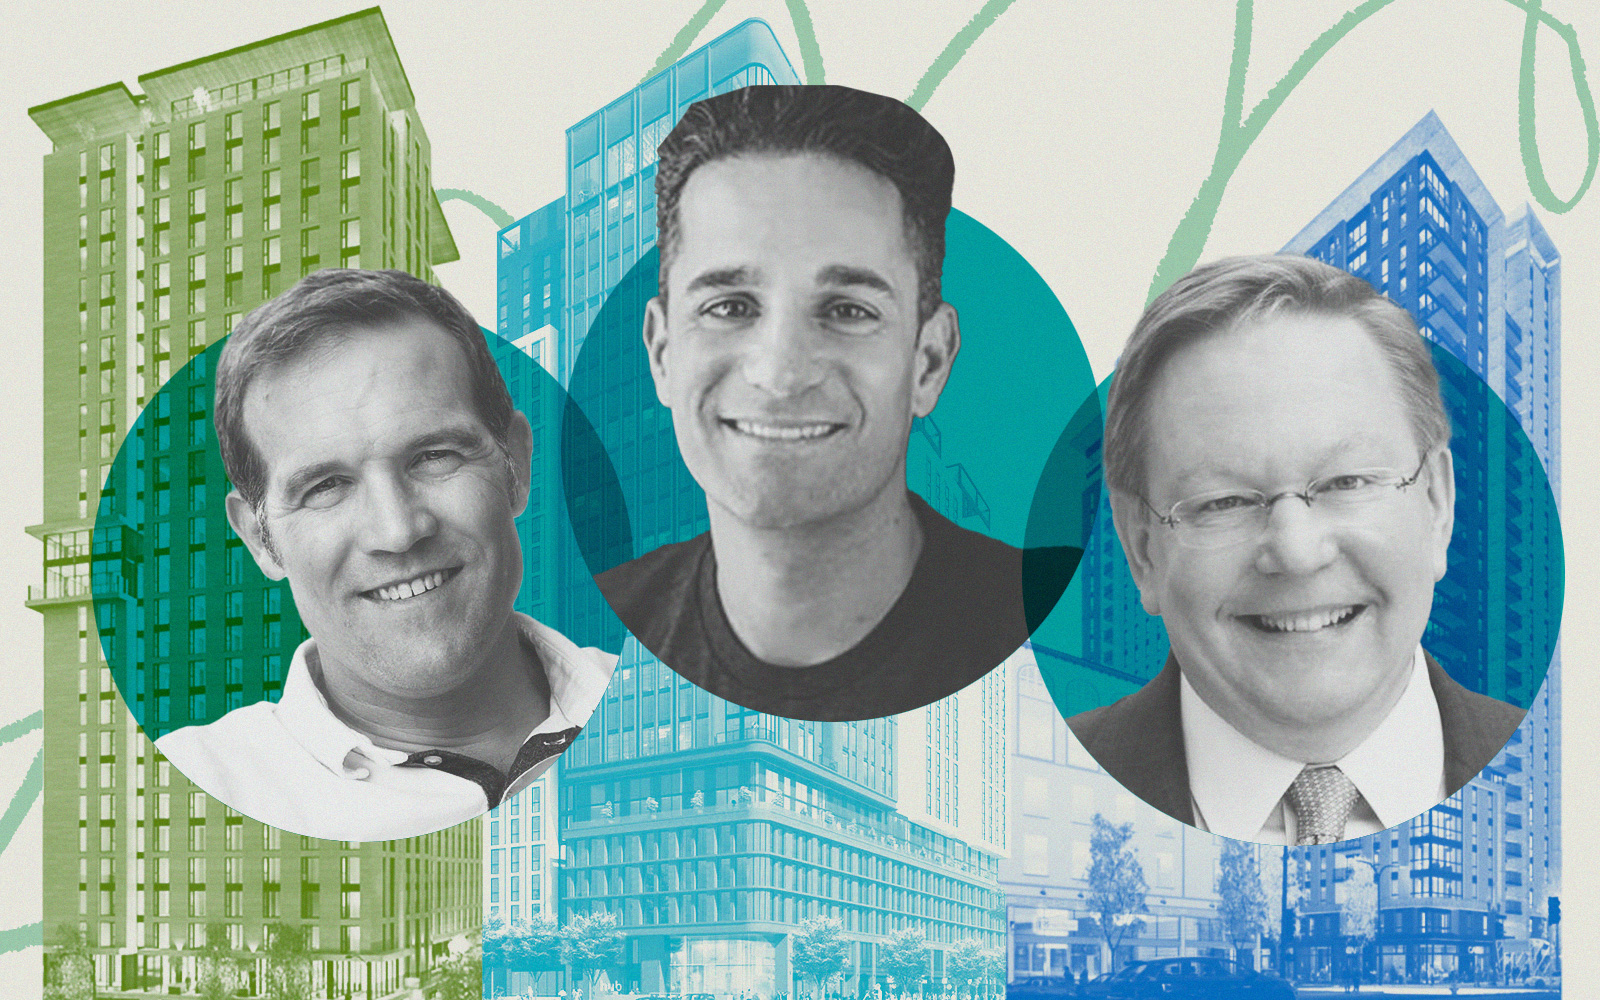 NX Venture’s Nathan George, Core Spaces' Marc Lifshin and PGIM's David Hunt with rendering of 1998 Shattuck Avenue, 2128 Oxford Street and 2190 Shattuck Avenue